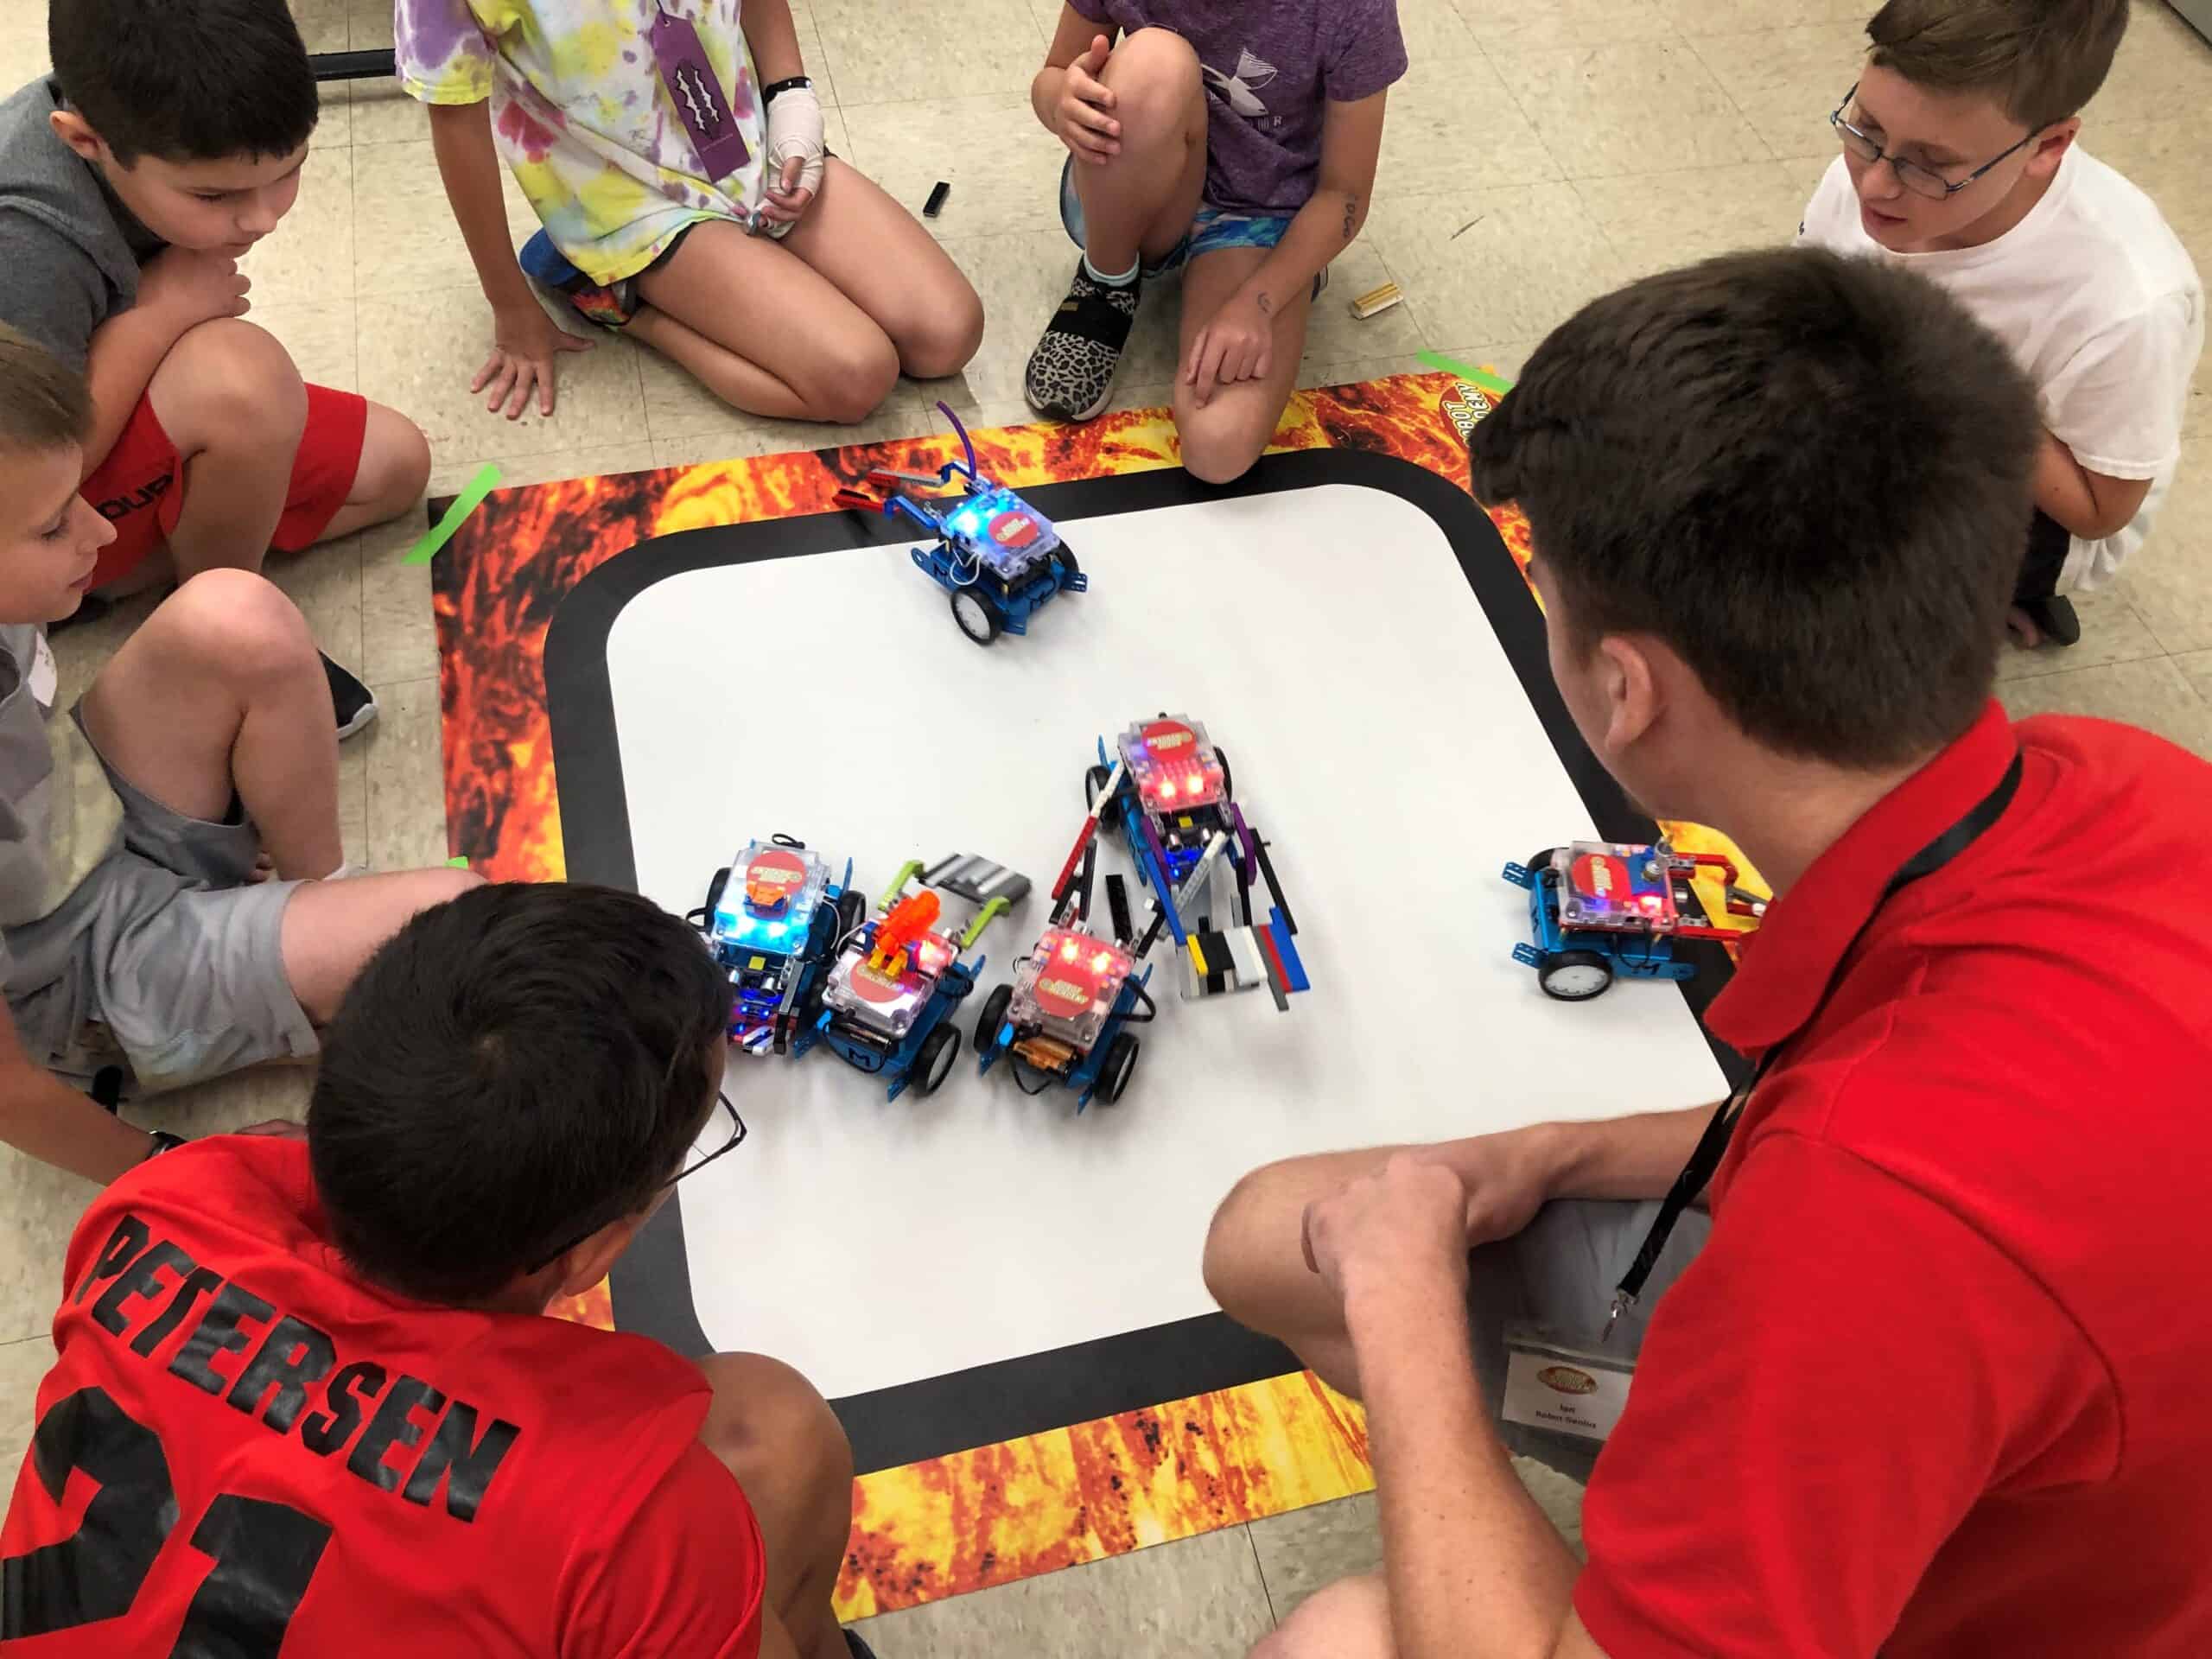 Read more about the article LEGO Robot Afterschool Class for 1st to 5th Grades | 9/15/22 to 11/17/22 | Tremont Elementary (Please put dismissal in comment section: SACC, Pick Up or Walk)